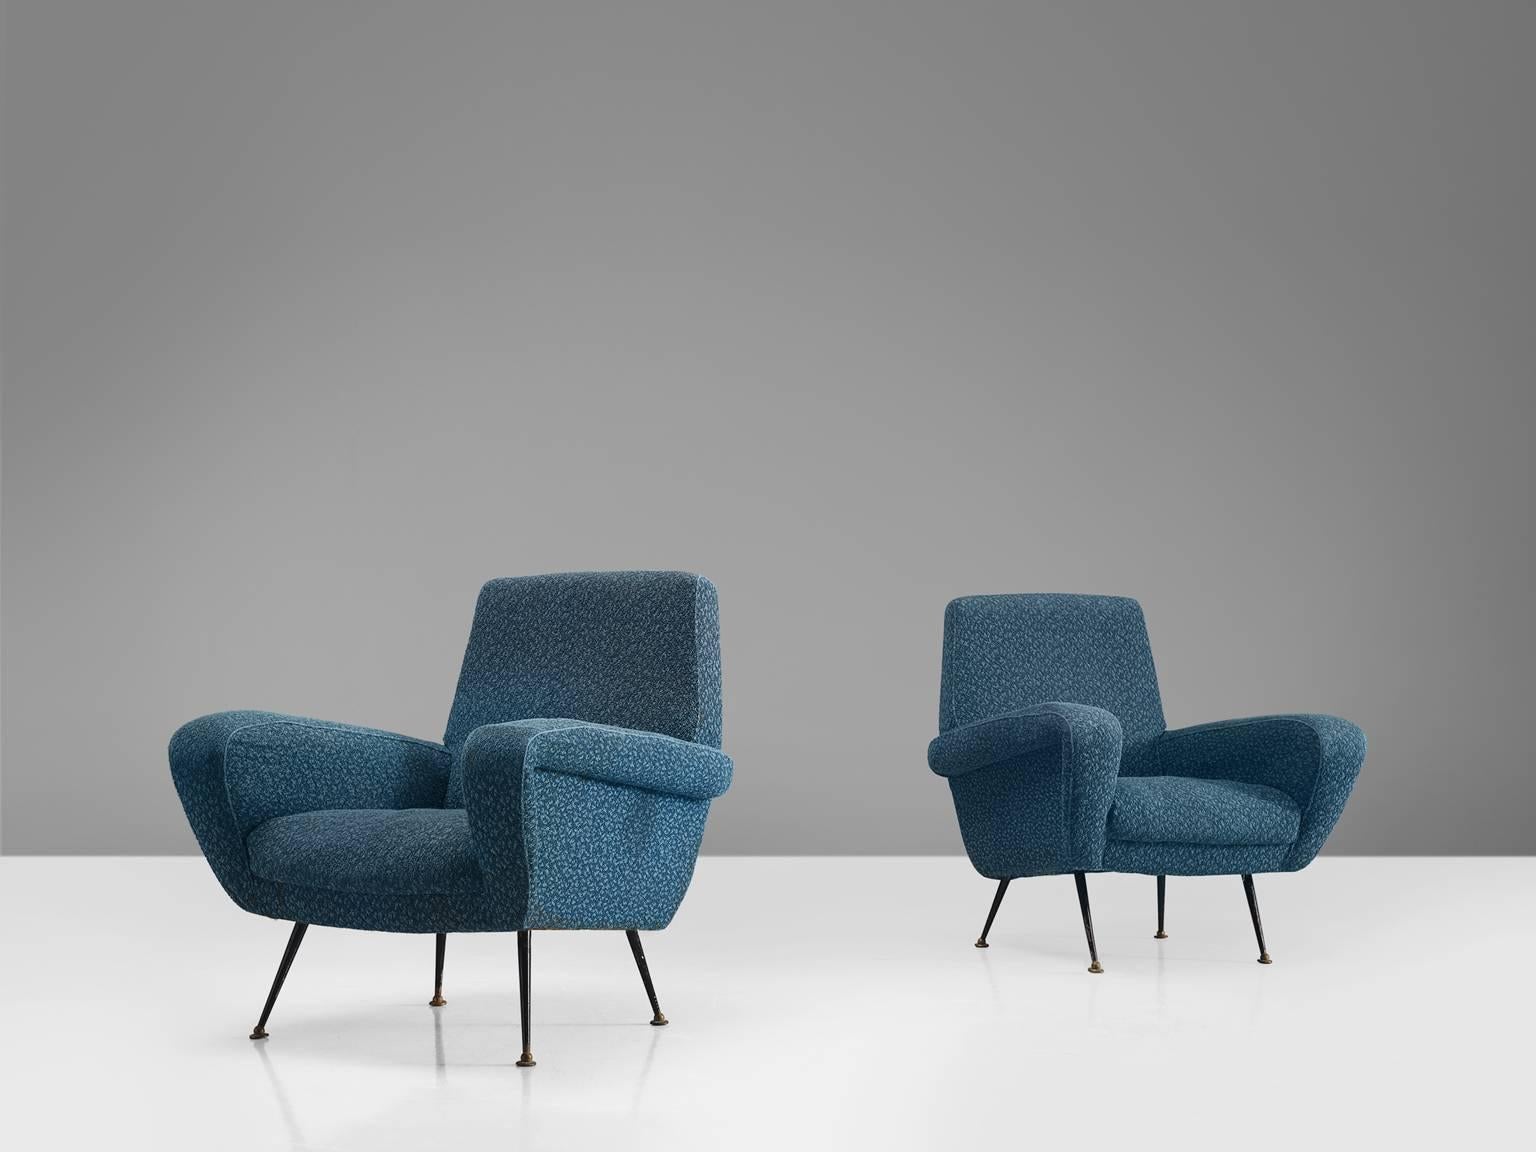 ISA armchairs, blue fabric (re-upholstery needed) wood, and brass, Italy, 1950s.

This dynamic set of two armchairs features a high back, voluptuous armrests and extremely slender and delicate legs. The four tapered delicate legs give this sofa a